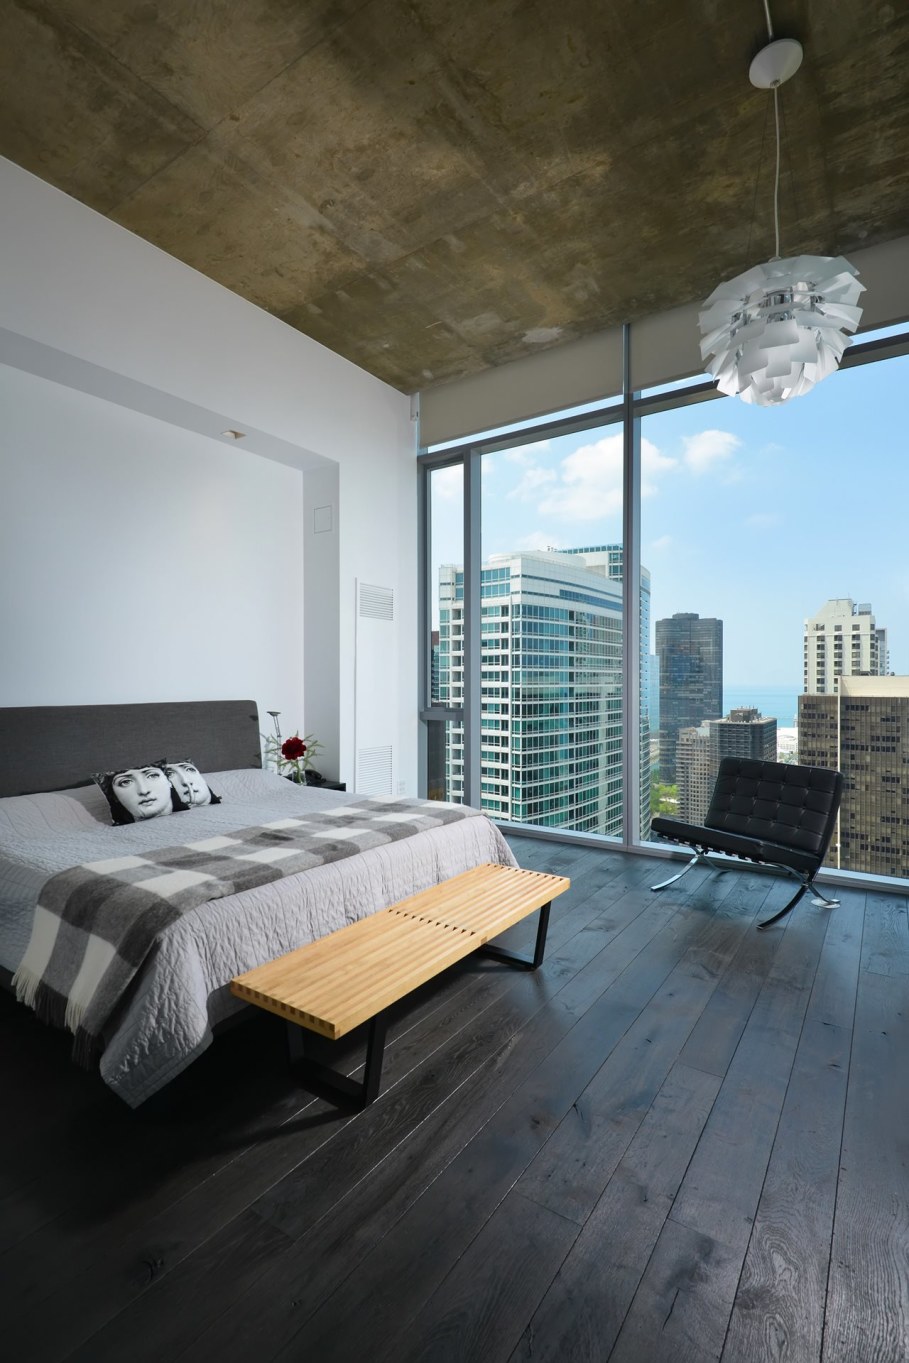 Penthouse Hi-Rise with panoramic view of Chicago - Bedroom